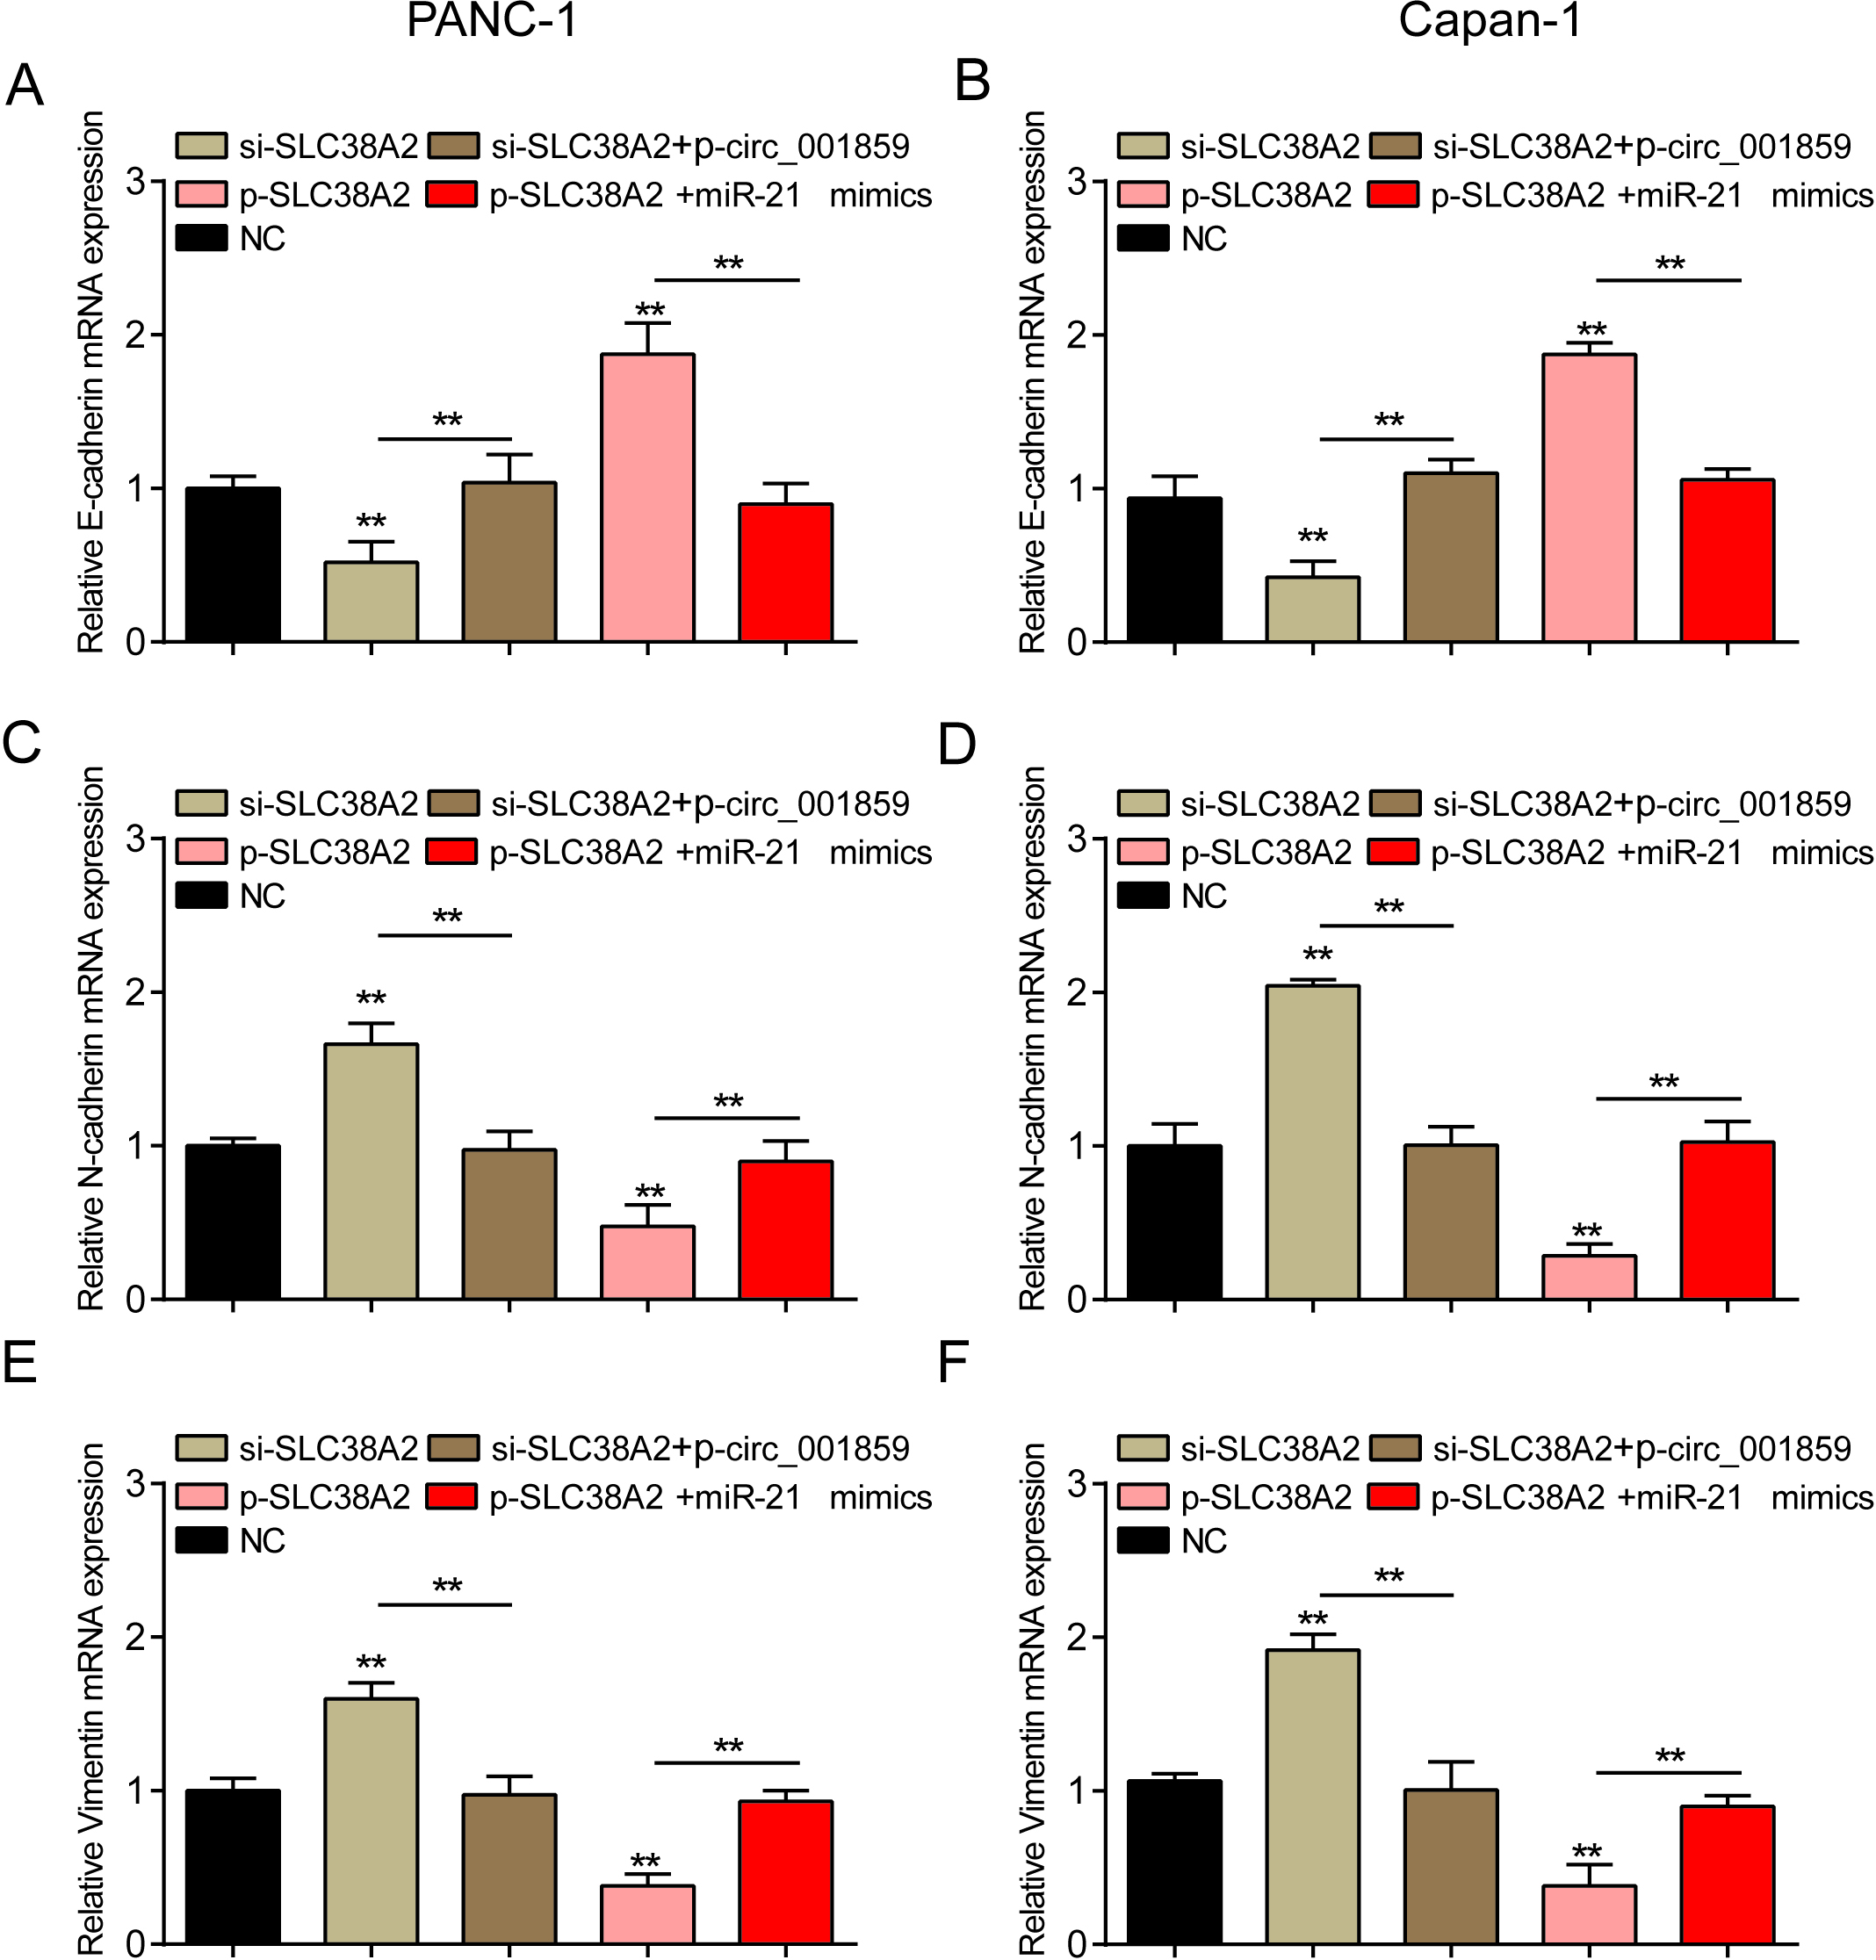 Circ_001859 affects EMT process through miR-21-5p/SLC38A2. (A–B) The expression level of E-cadherin mRNA was detected by QRT-PCR in each treatment group. (C–D) The expression level of N-cadherin mRNA was detected by QRT-PCR in each treatment group. (E–F) The expression level of Vimentin mRNA was detected by QRT-PCR in each treatment group. P**< 0.01, indicated statistical significance.